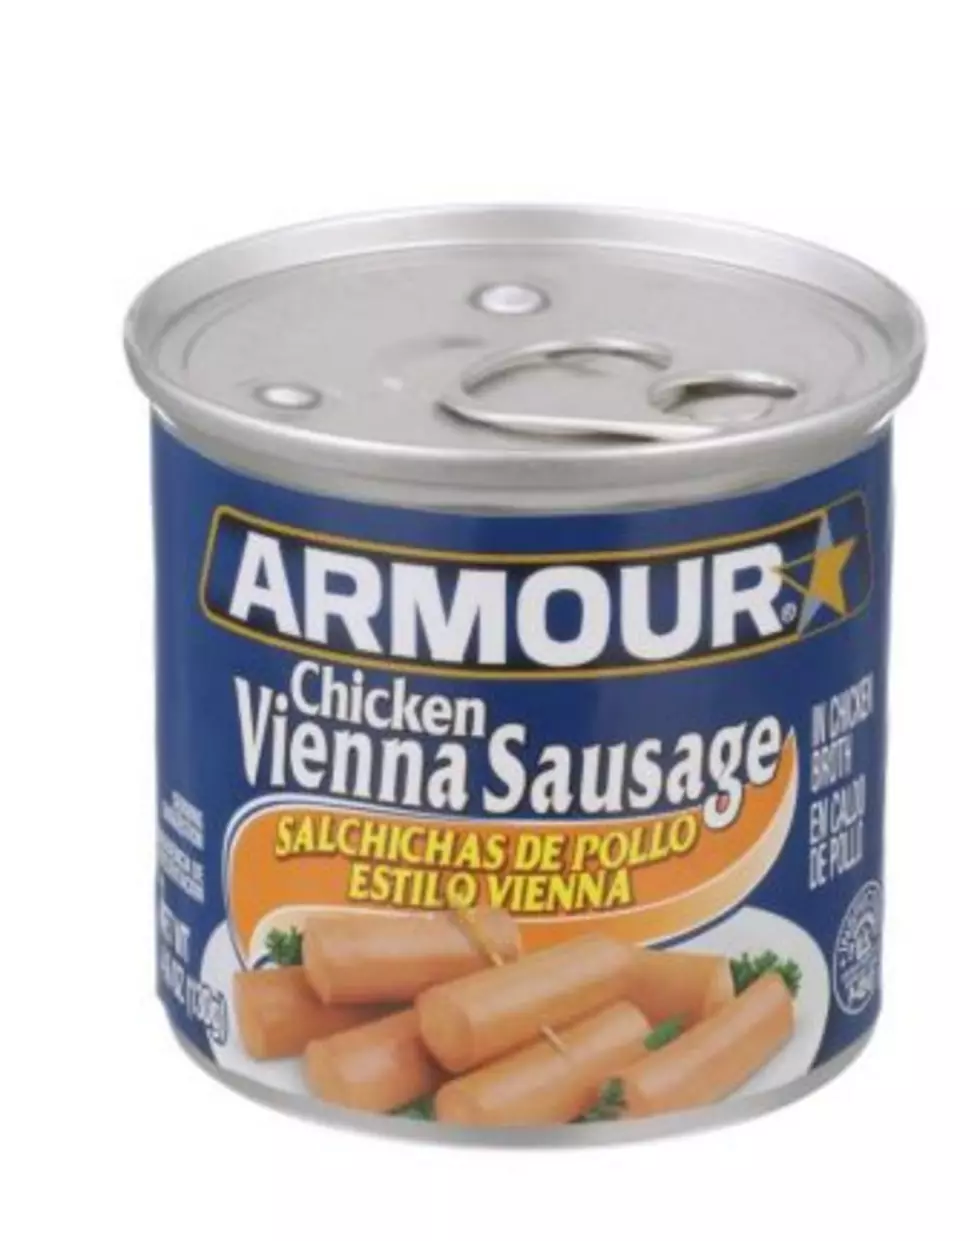 2.5 Million Pounds of Canned Meat Recalled